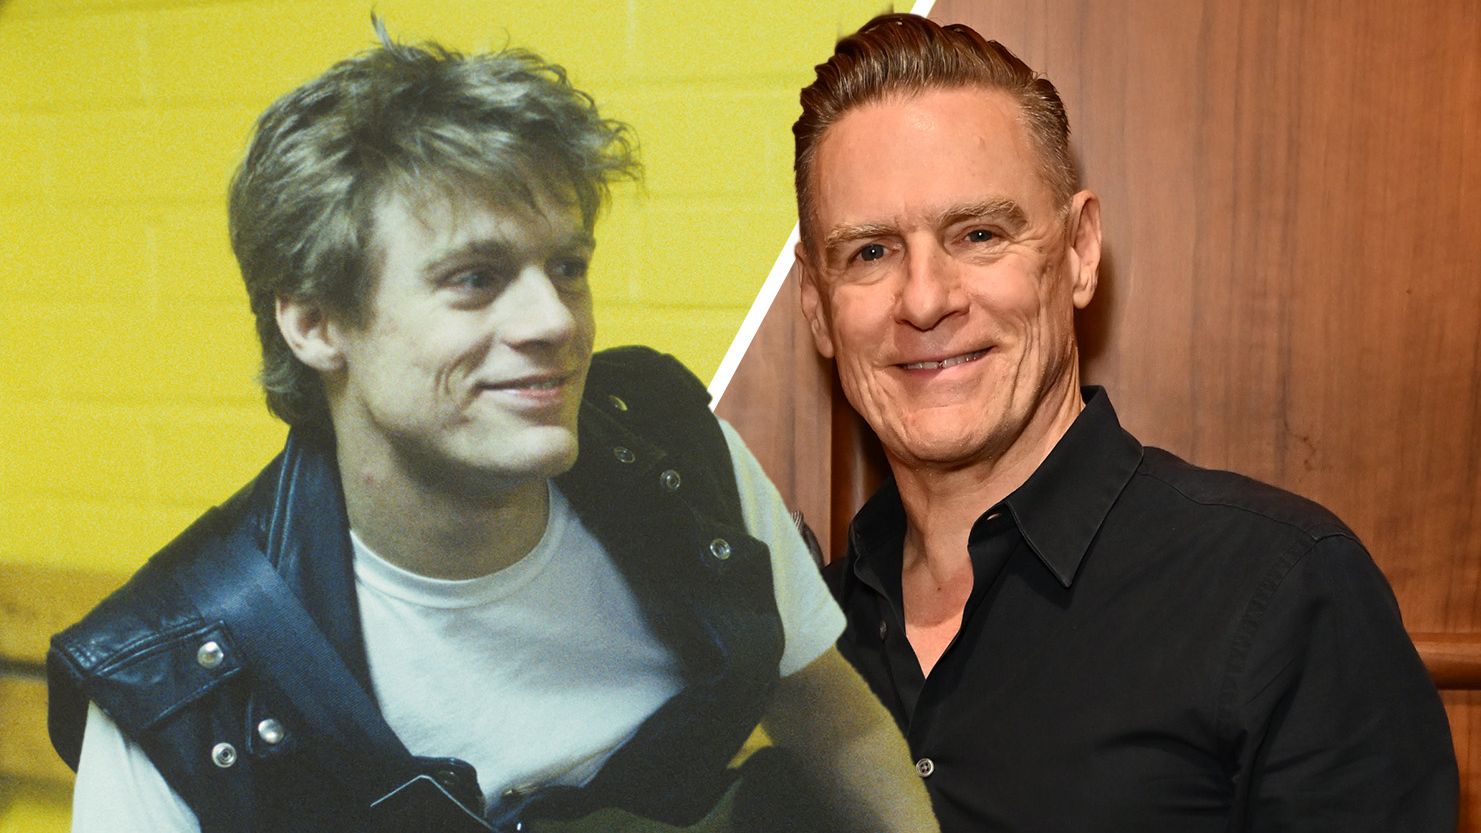 Bryan Adams is heading out on a cross-Canada tour later this year